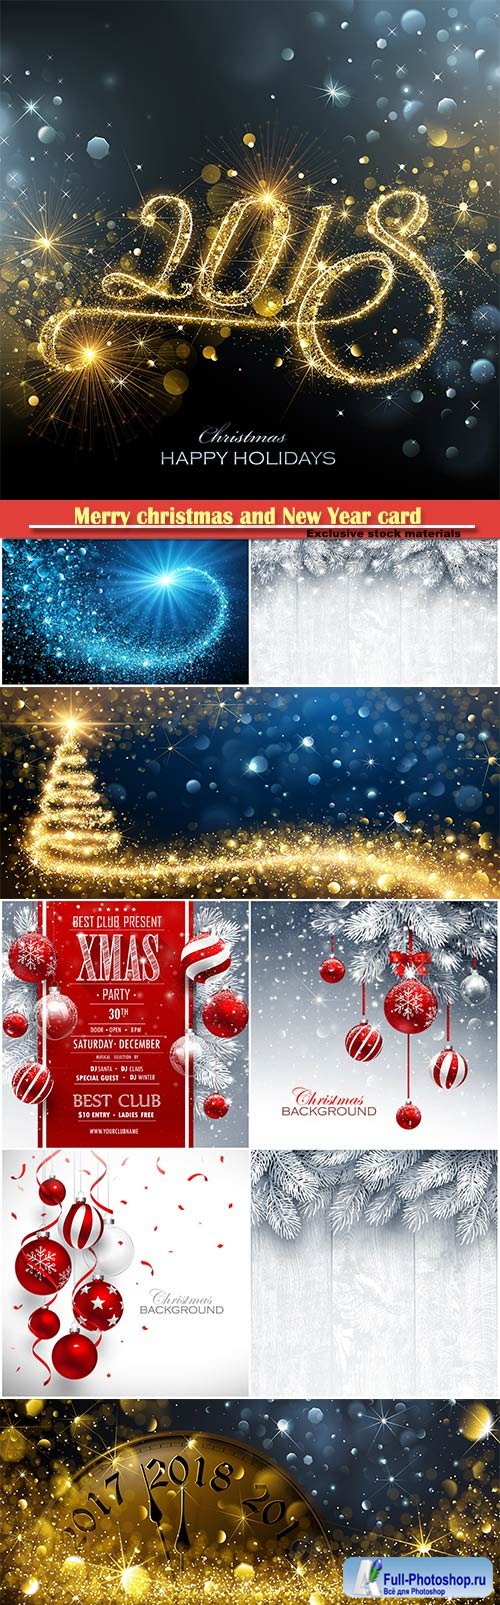 Merry christmas and New Year card with red balls and fir branches, snowy sparkling background